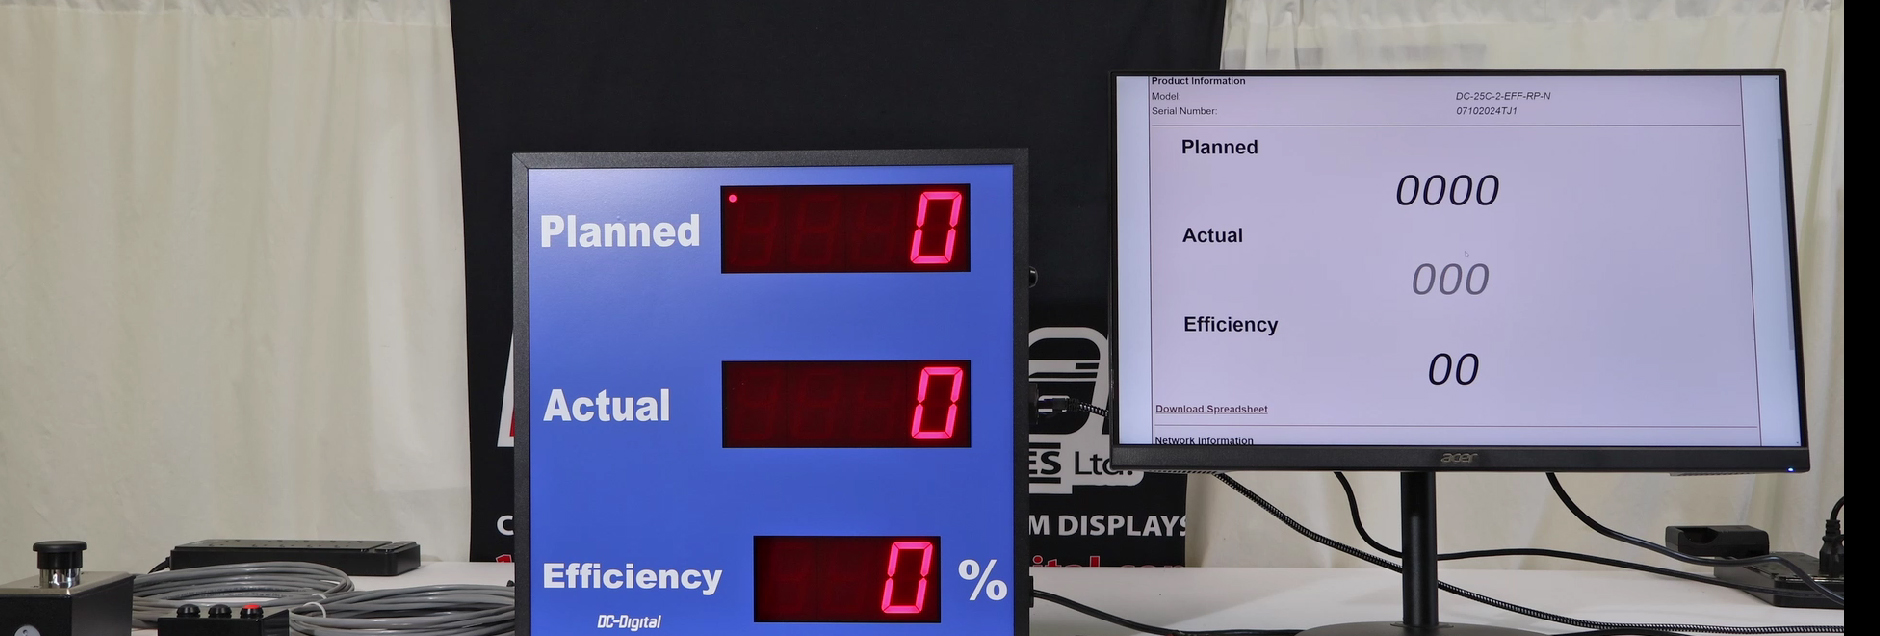 DC-Digital, Efficiency Production Counter, Planned, Actual, Blue Front Cover, 2.3 inch Digit LED, White Table, Environmental Sealed Switch, 40 mm palm switch,24 VDC, Computer Screen, 25 feet of wire